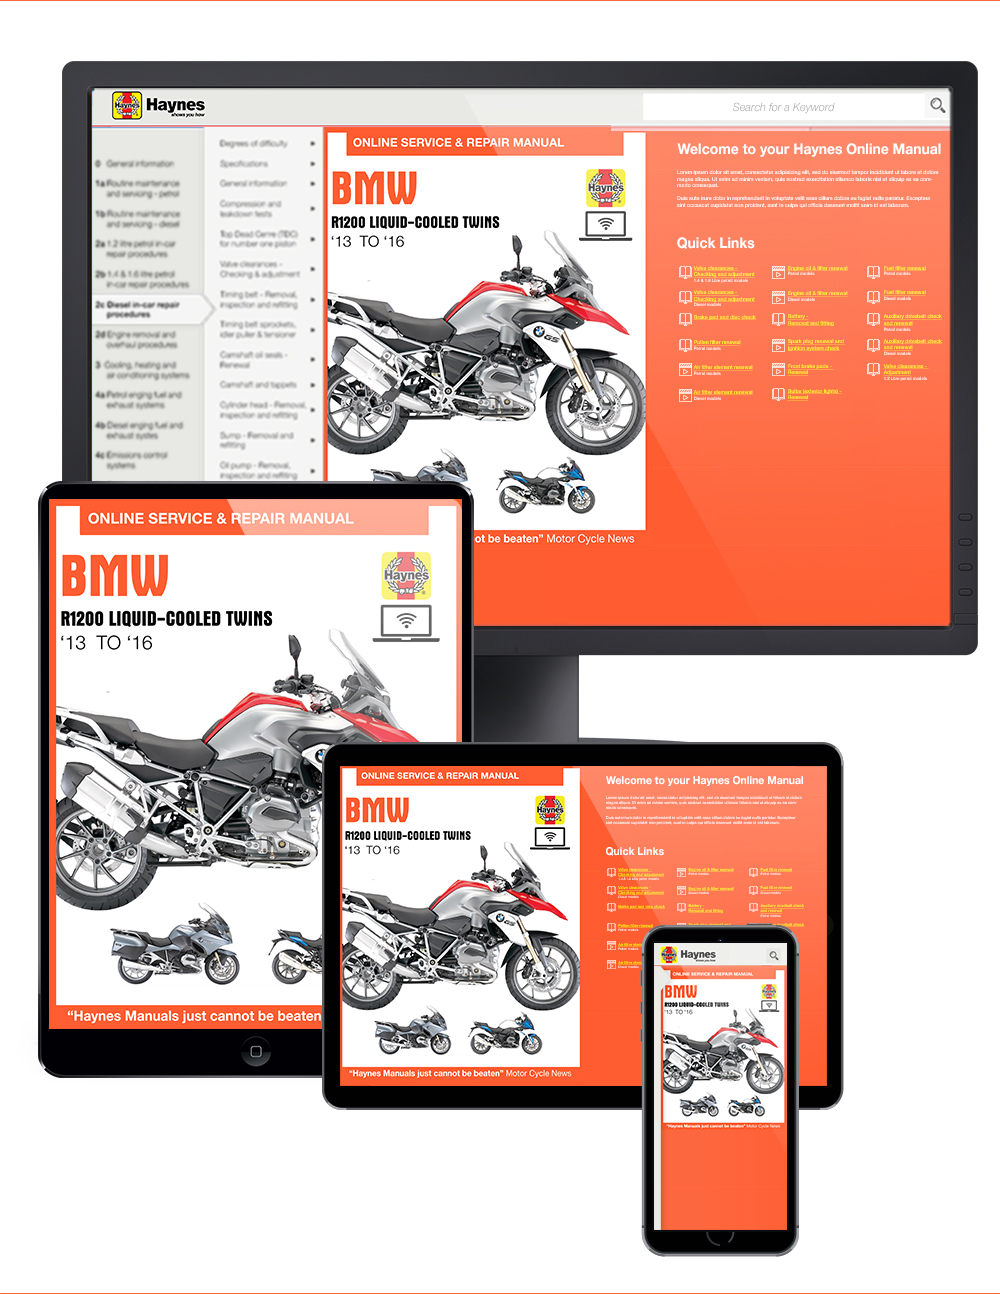 Bmw 1200 gs owners manual free download 2013 torrent